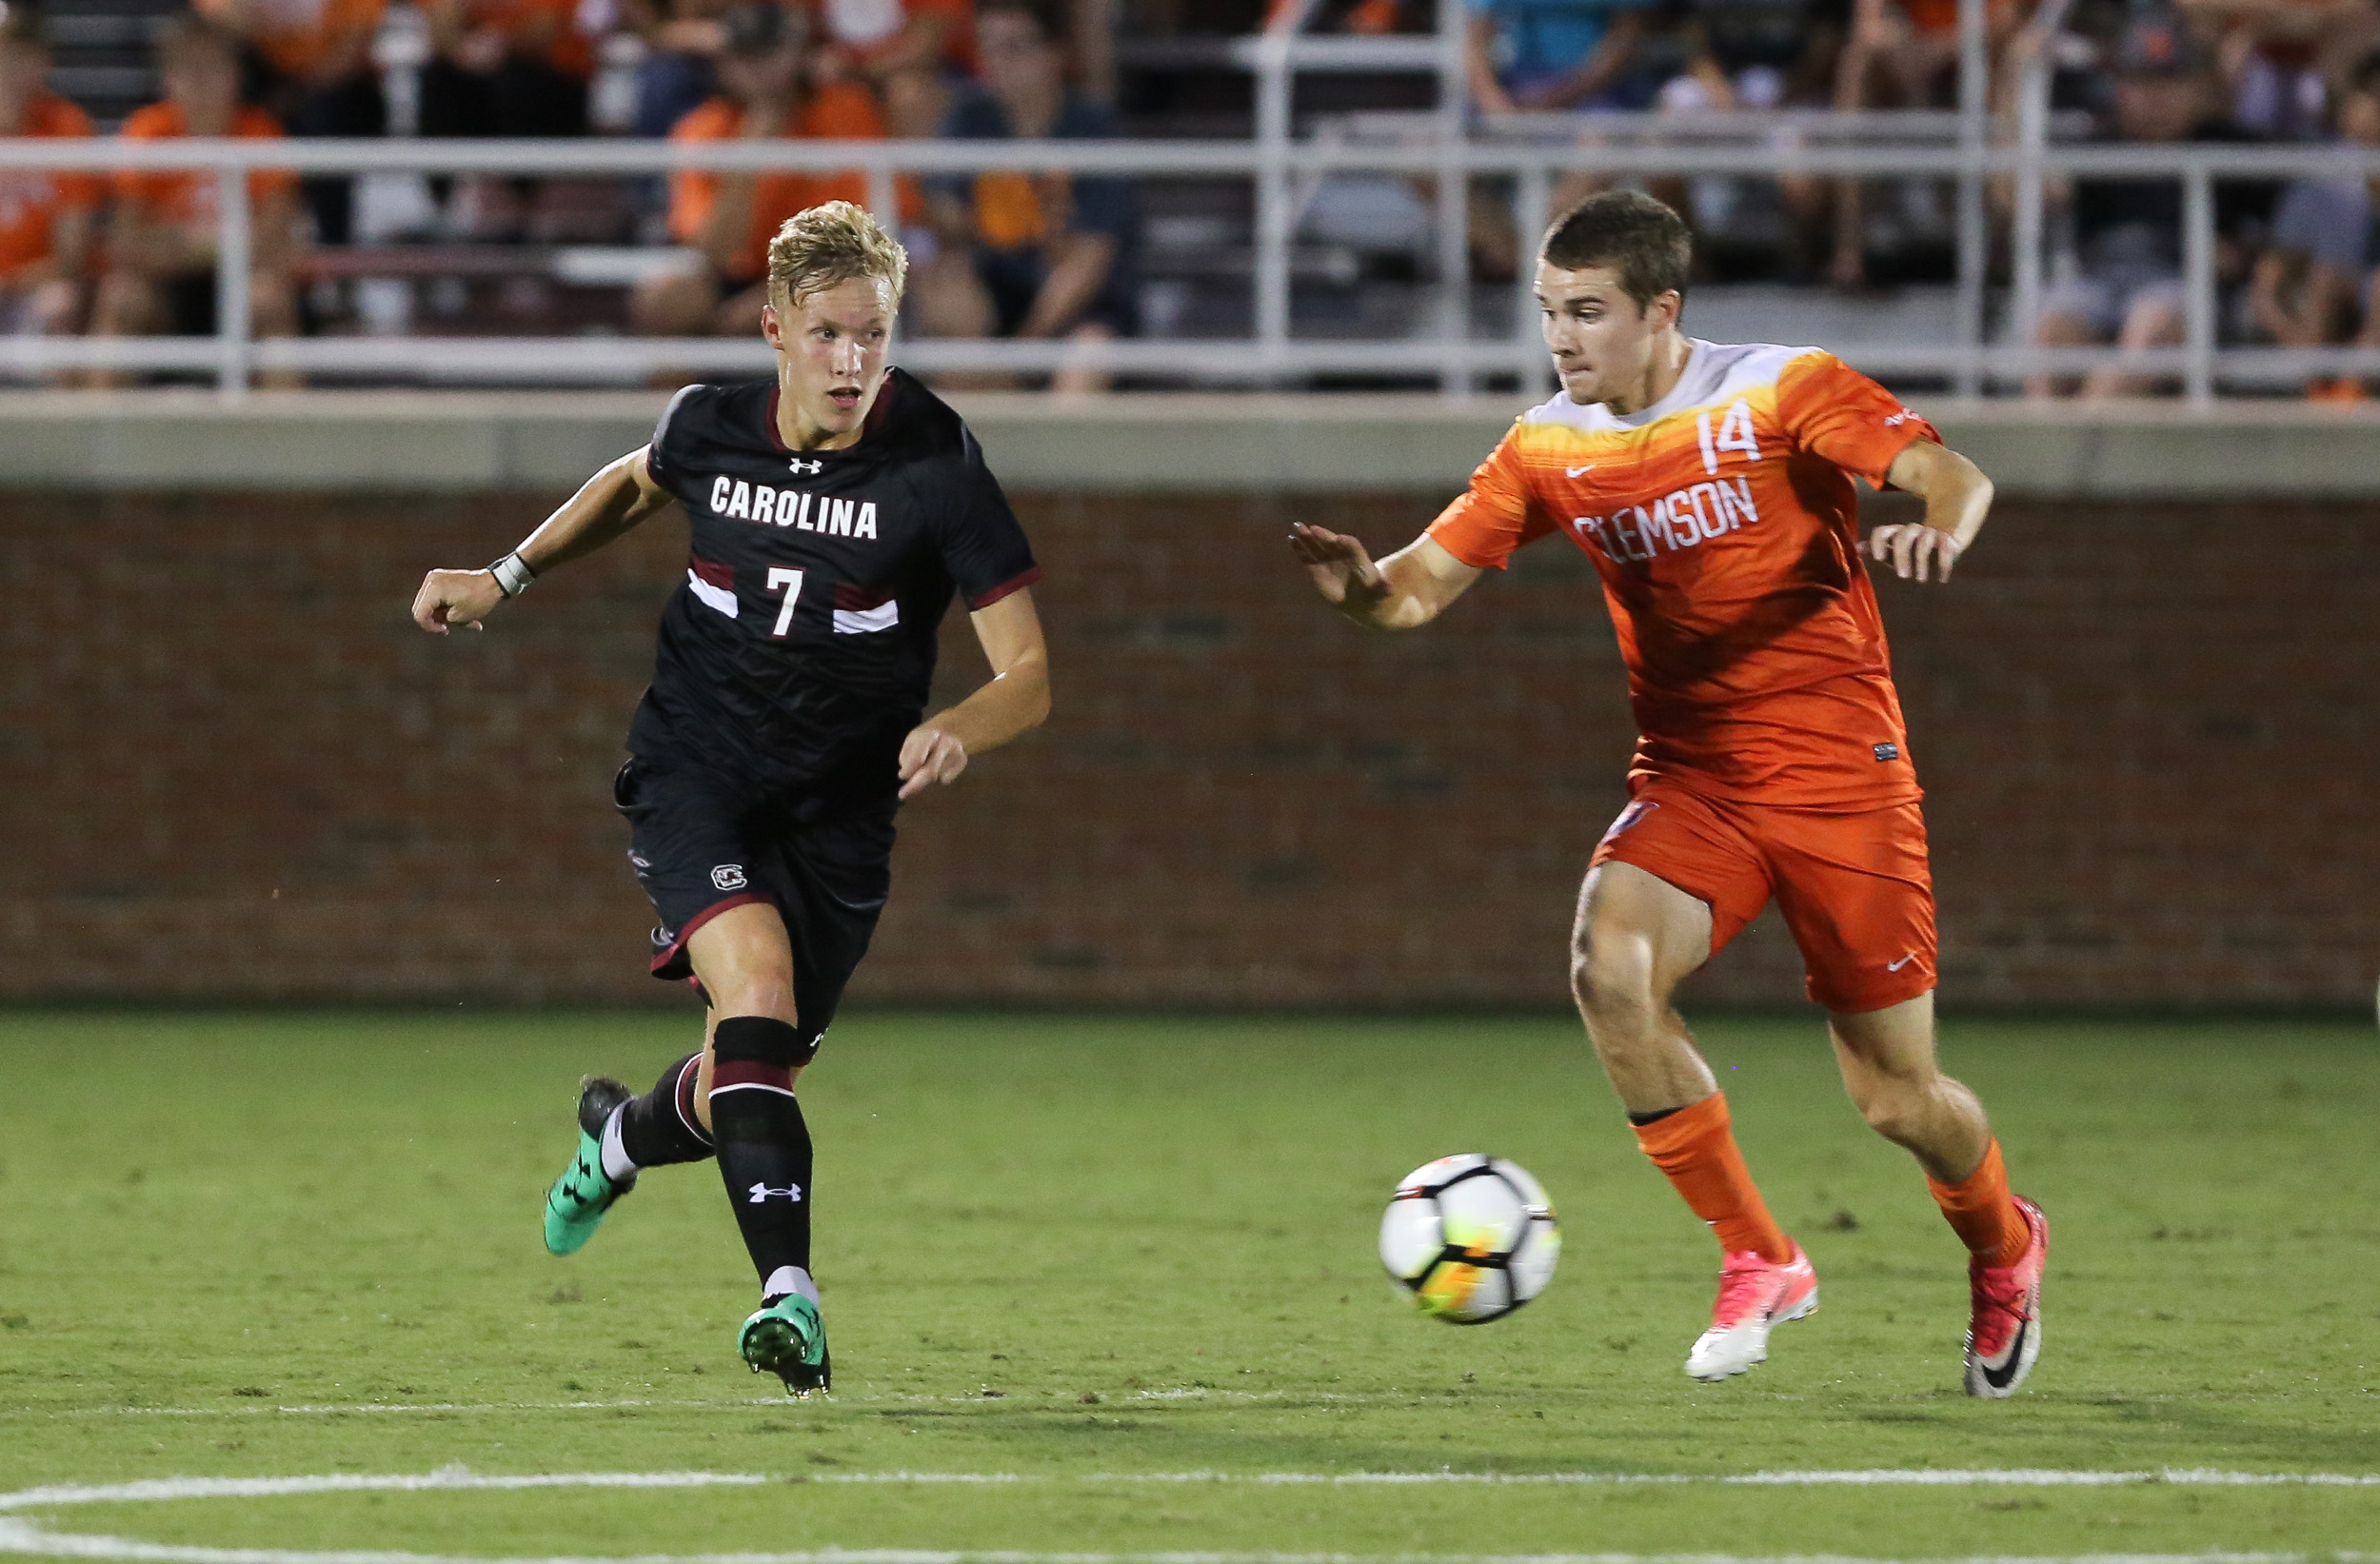 Gamecocks Handed First Loss At No. 5 Clemson, 4-1